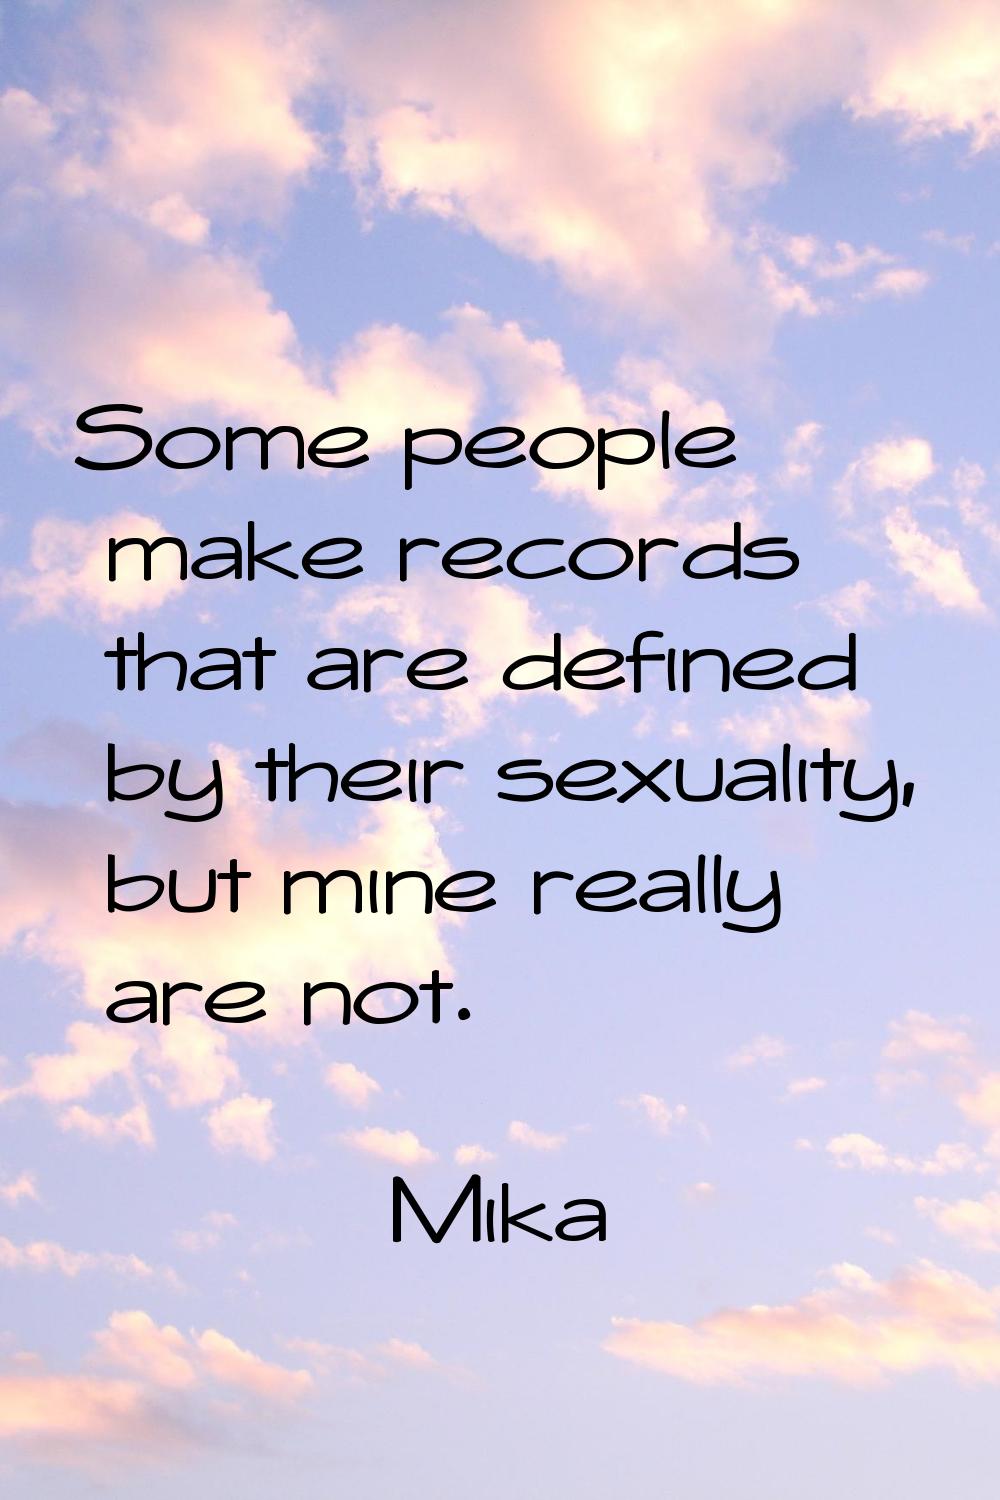 Some people make records that are defined by their sexuality, but mine really are not.